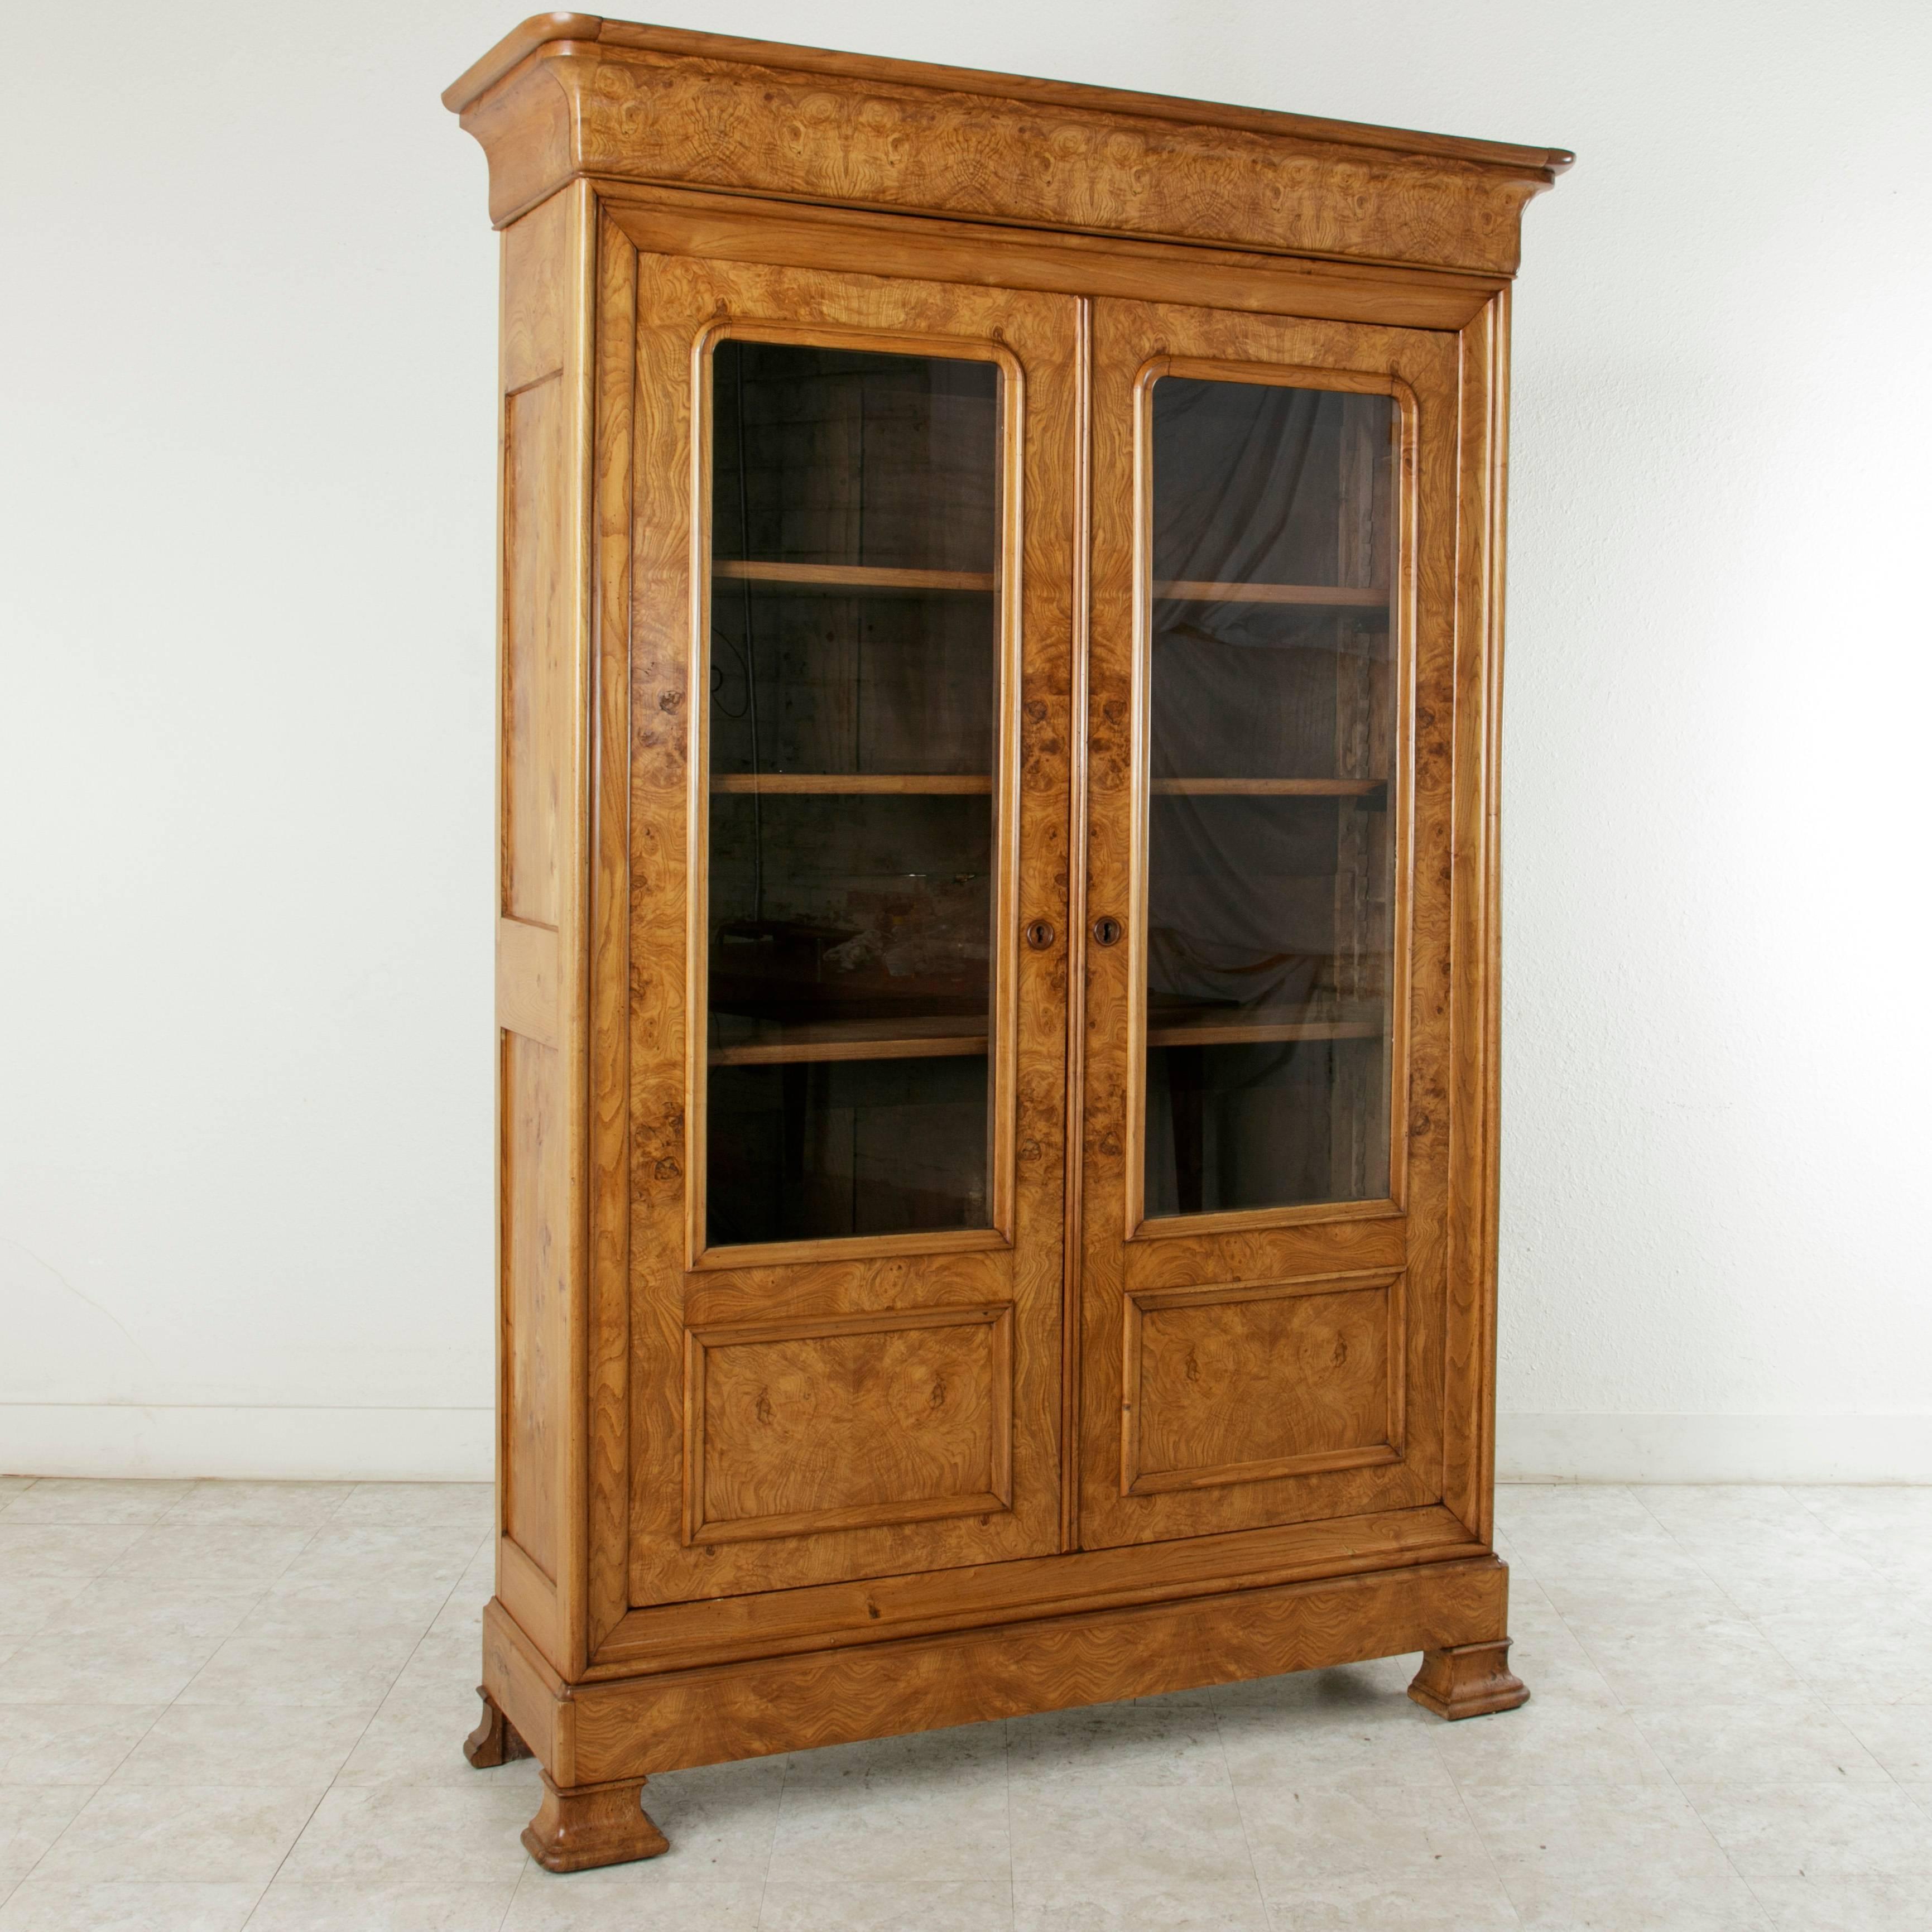 This Louis Philippe style bibliothèque or bookcase from the late 19th century features a facade of exquisite book matched burl ash. Two doors inset with glass open to reveal an interior with four adjustable shelves that provide ample storage and